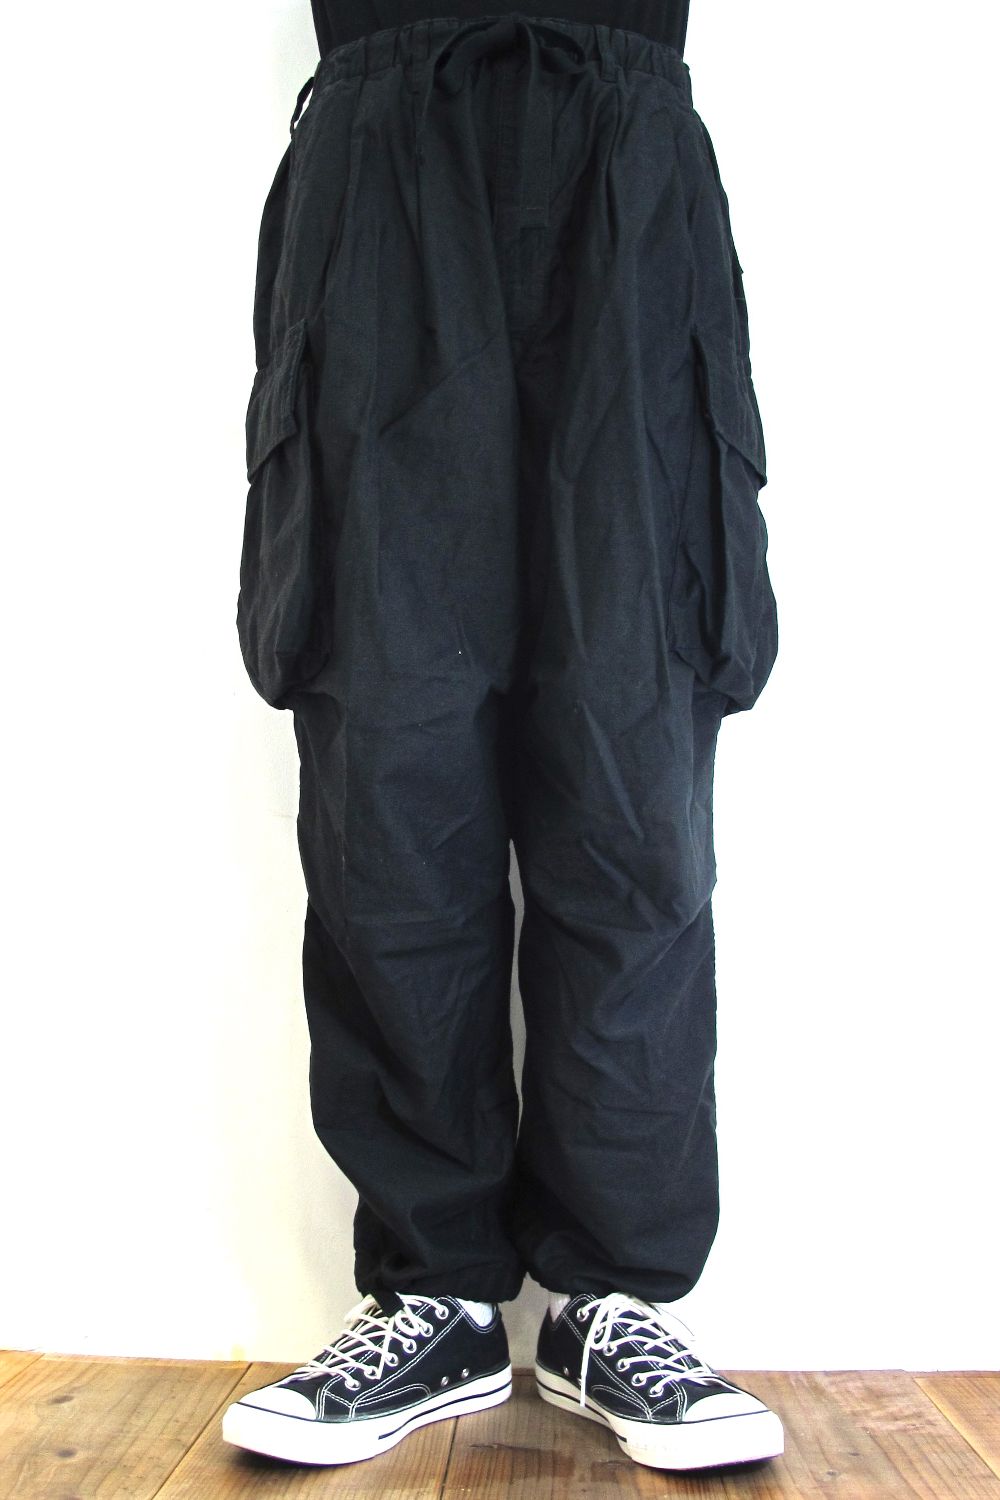 COOTIE / Back Satin Error Fit Cargo Easy Pants 入荷致しました